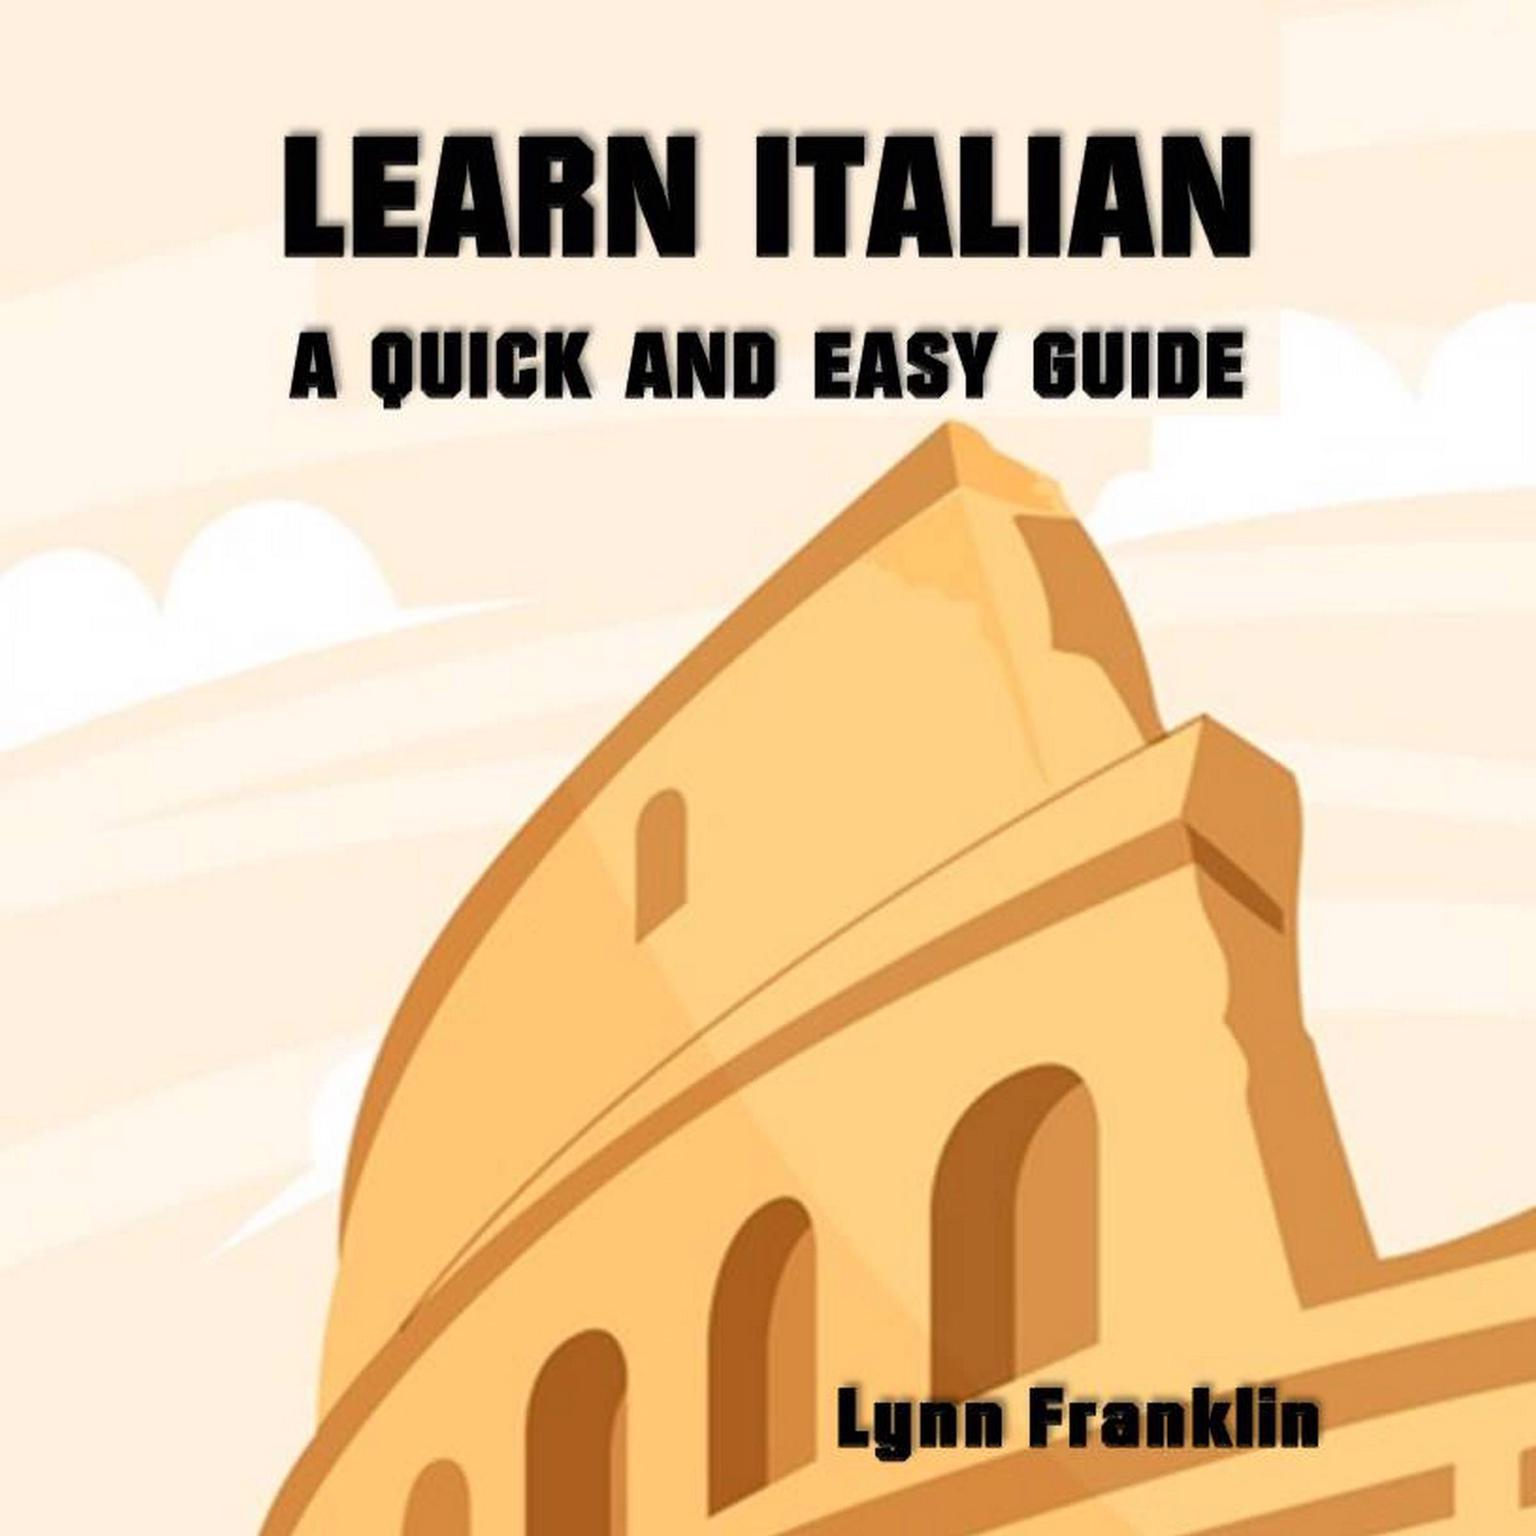 Learn Italian: A Quick and Easy Guide Audiobook, by Lynn Franklin